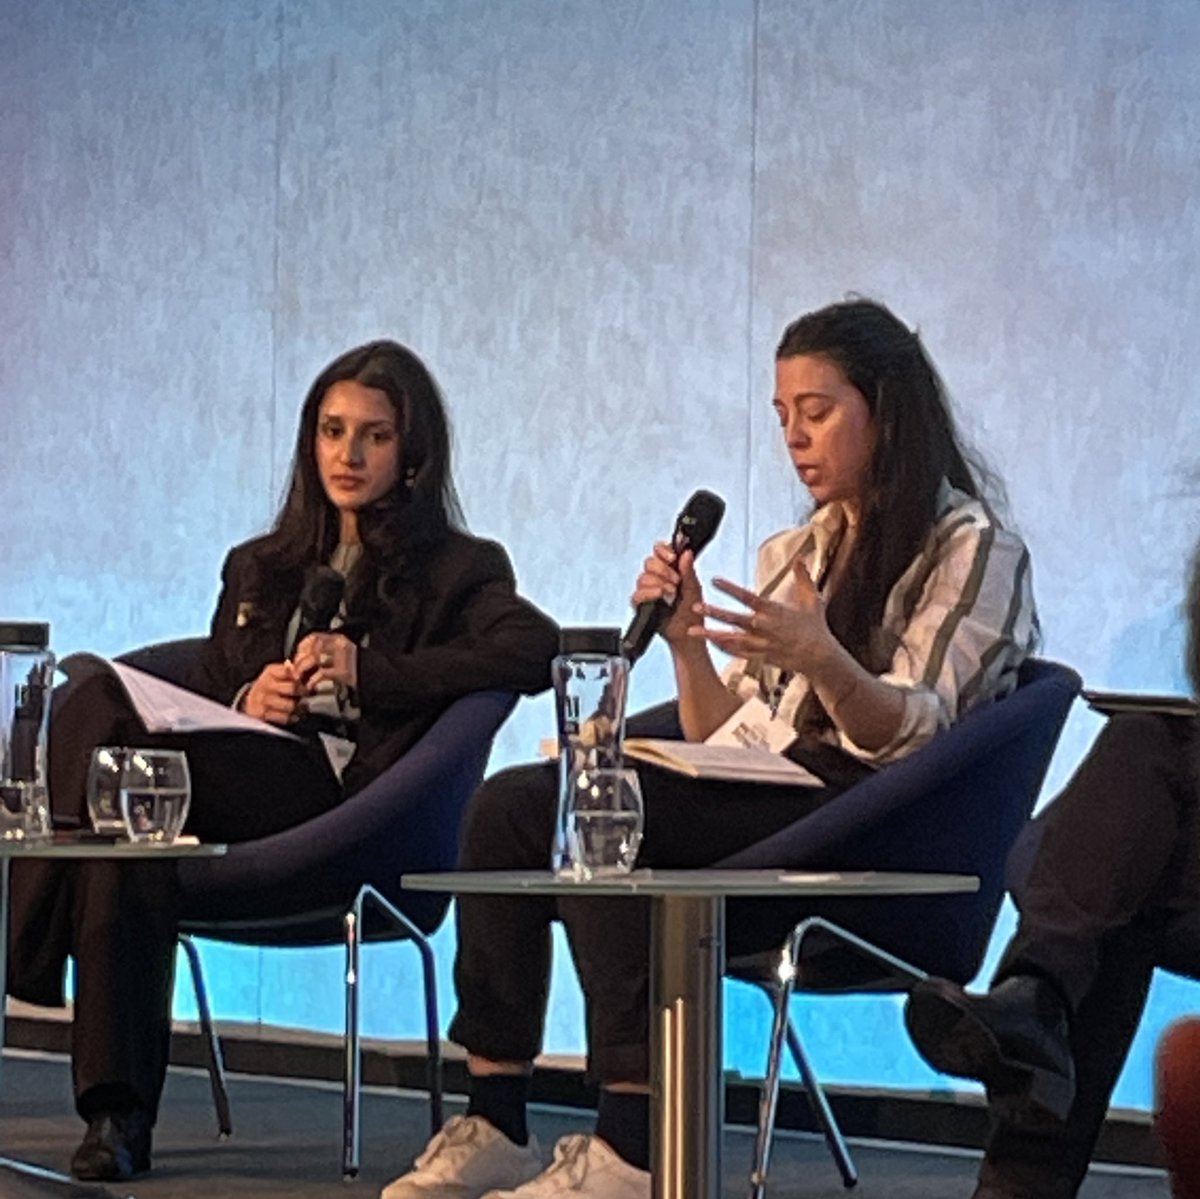 Big shoutout to @CaseyNCalista for mentioning @bcs at the @NewStatesman conference today - Path to Power. She was referring to the need for an “agile and iterative” education system reflecting the #tech #skills we need, like #AI - which we champion. #NSPath2Power